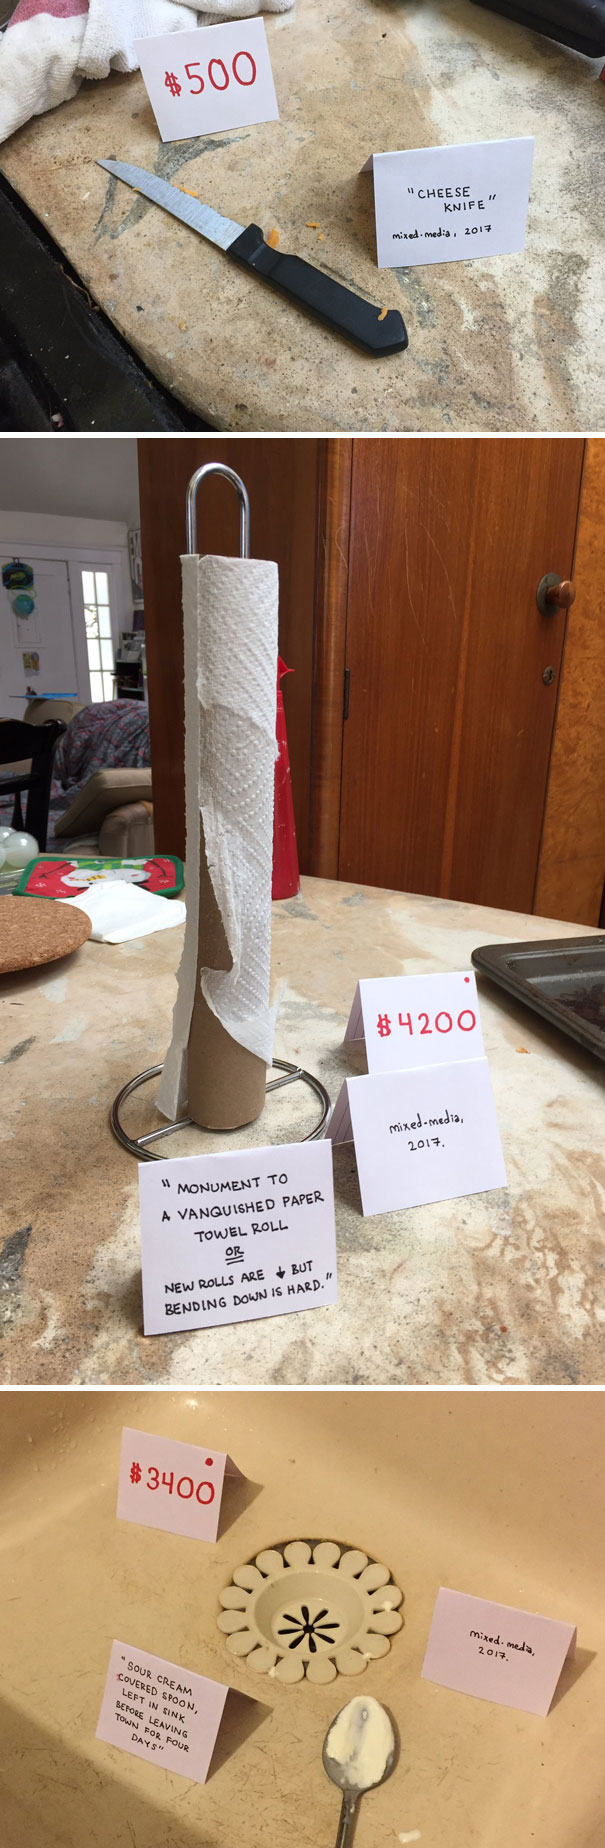 This Guy Turns His Roommate’s Mess Into A “passive-Aggressive Art Gallery”